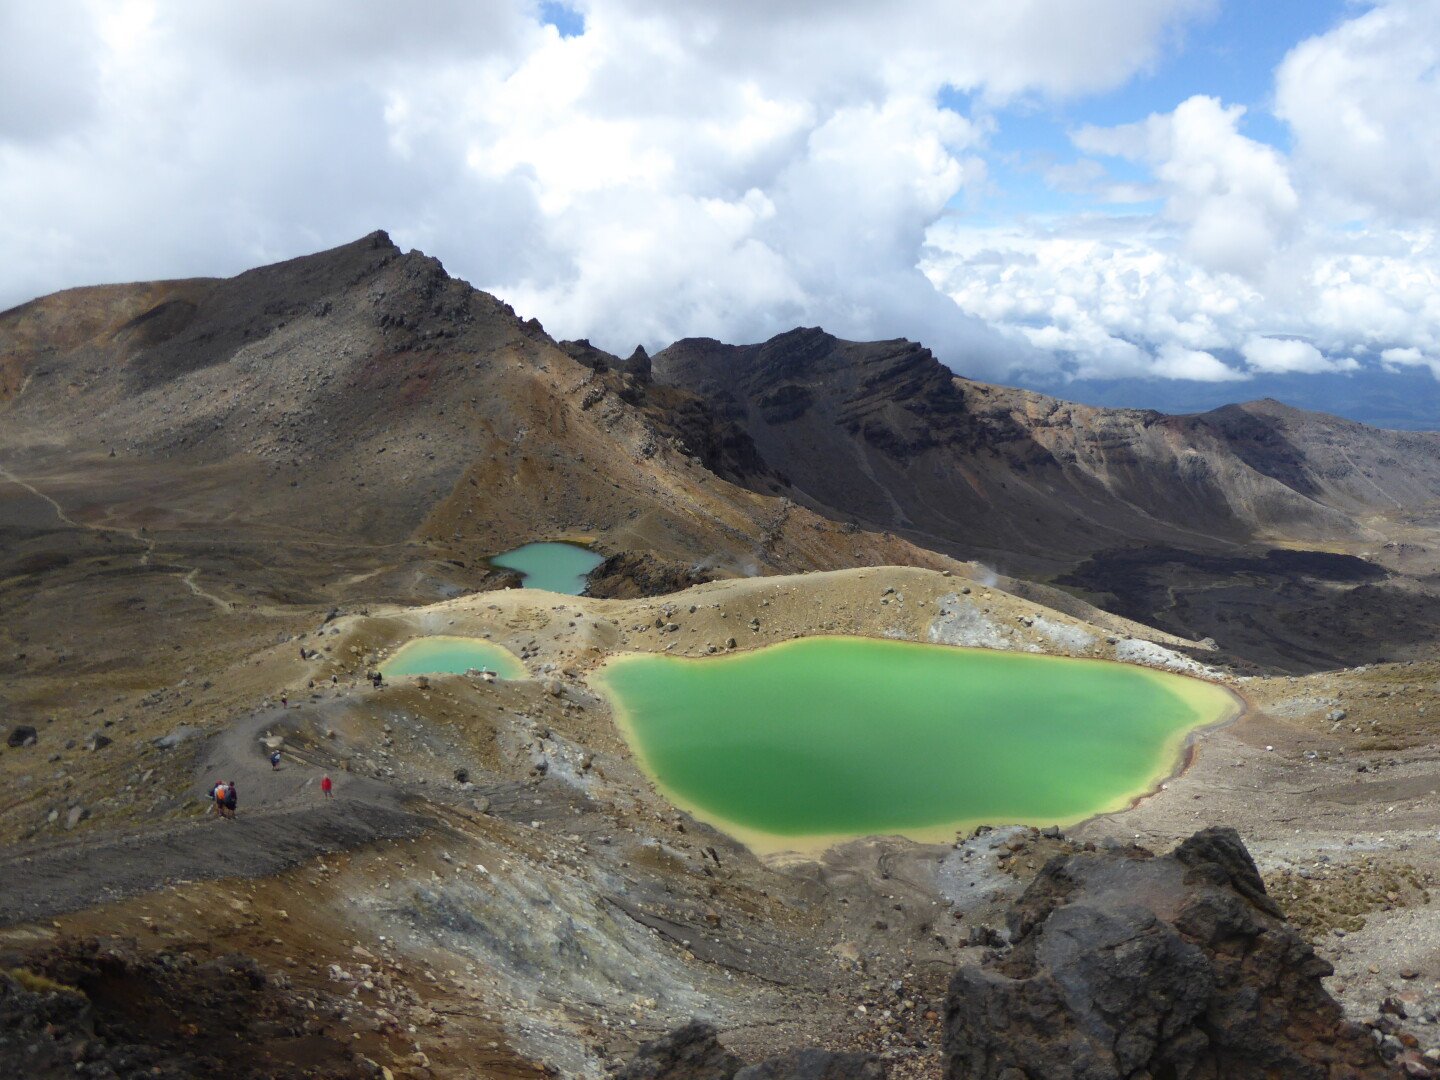 Looking north over Emerald Lakes from the summit of the Tongariro crossing